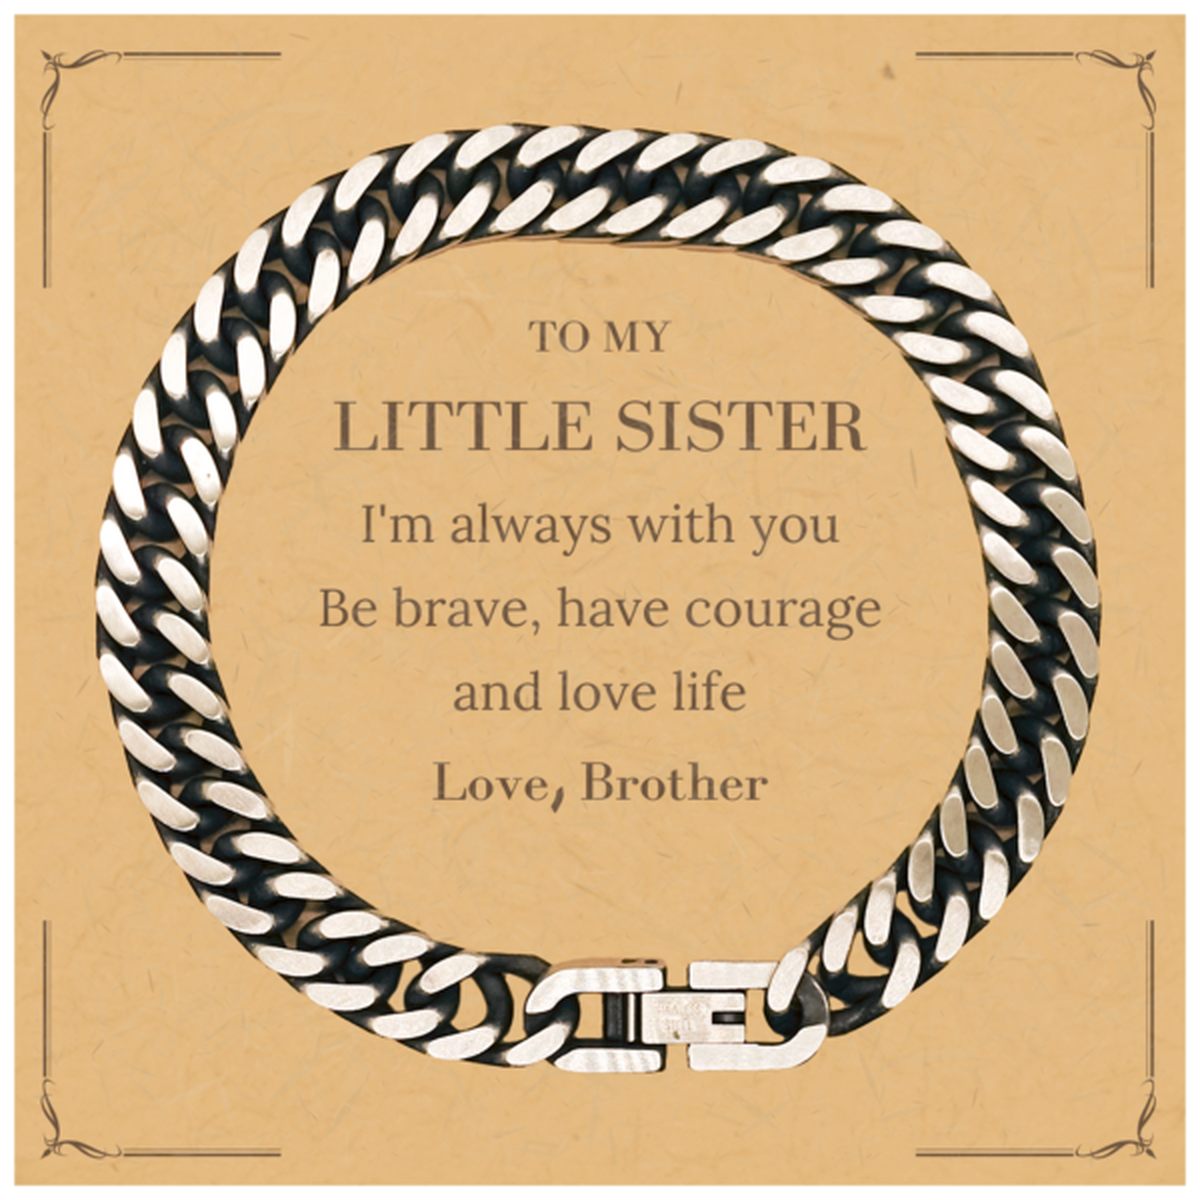 To My Little Sister Gifts from Brother, Unique Cuban Link Chain Bracelet Inspirational Christmas Birthday Graduation Gifts for Little Sister I'm always with you. Be brave, have courage and love life. Love, Brother